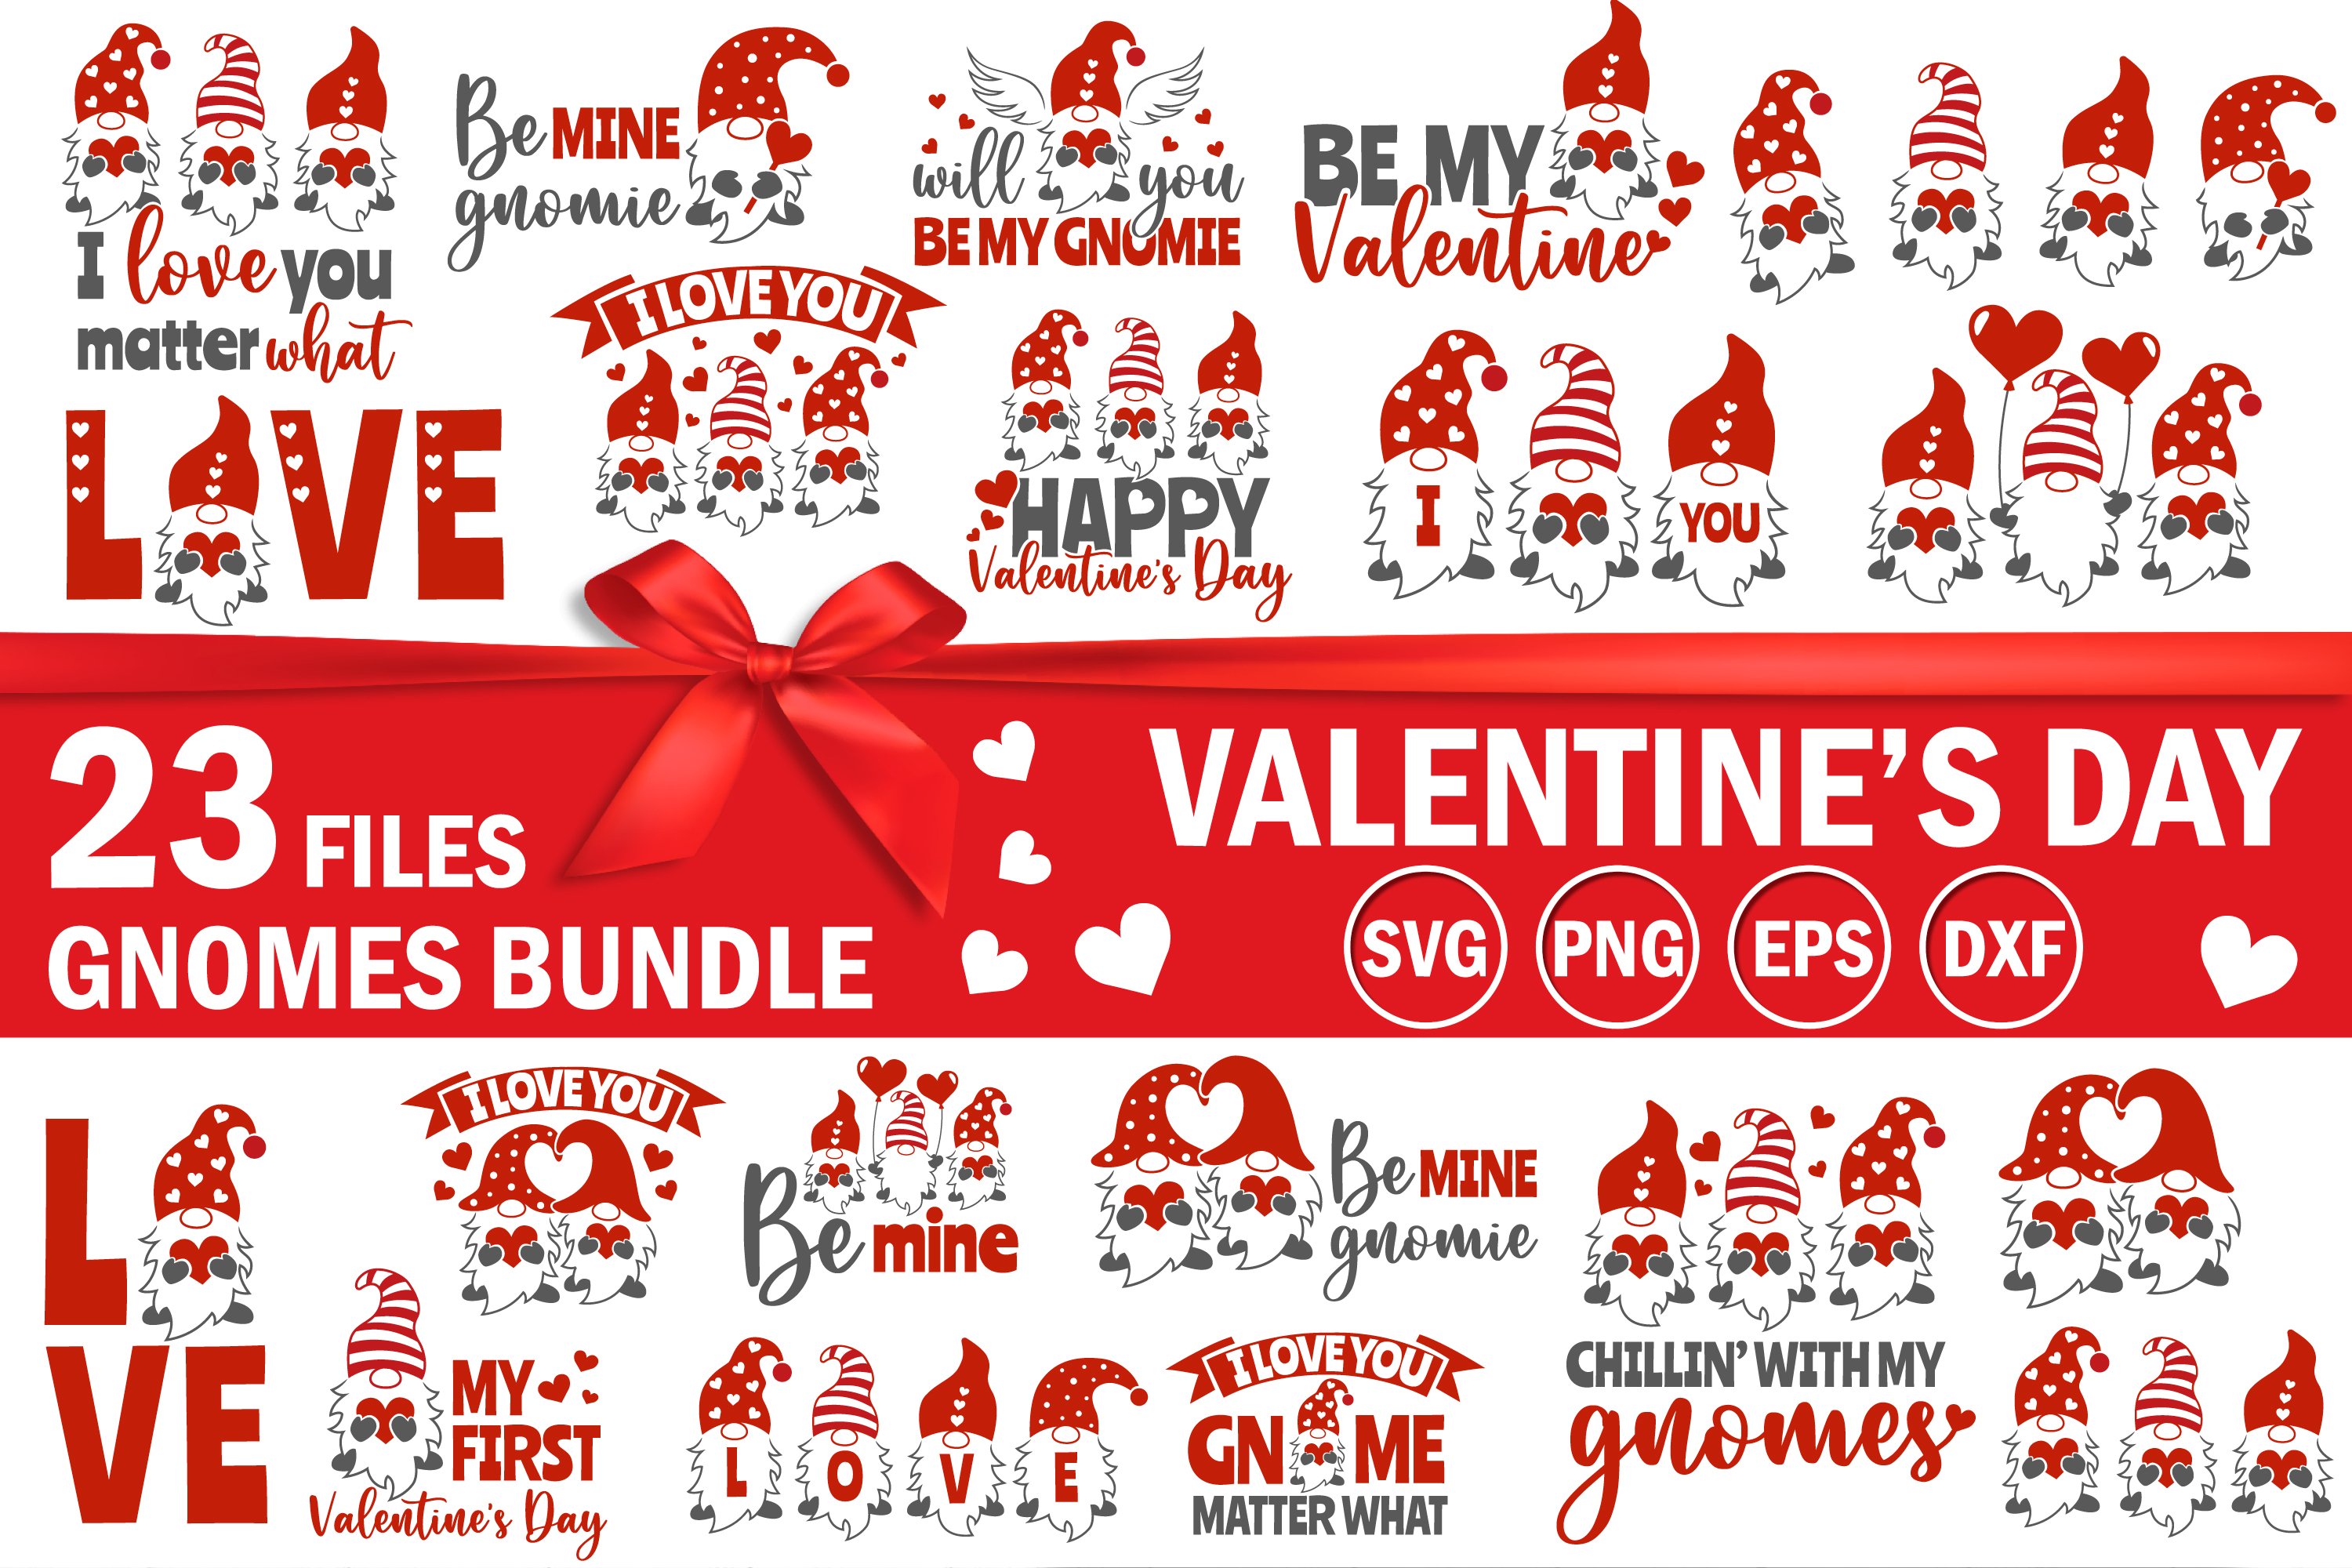 Cool collection of valentine gnomes.